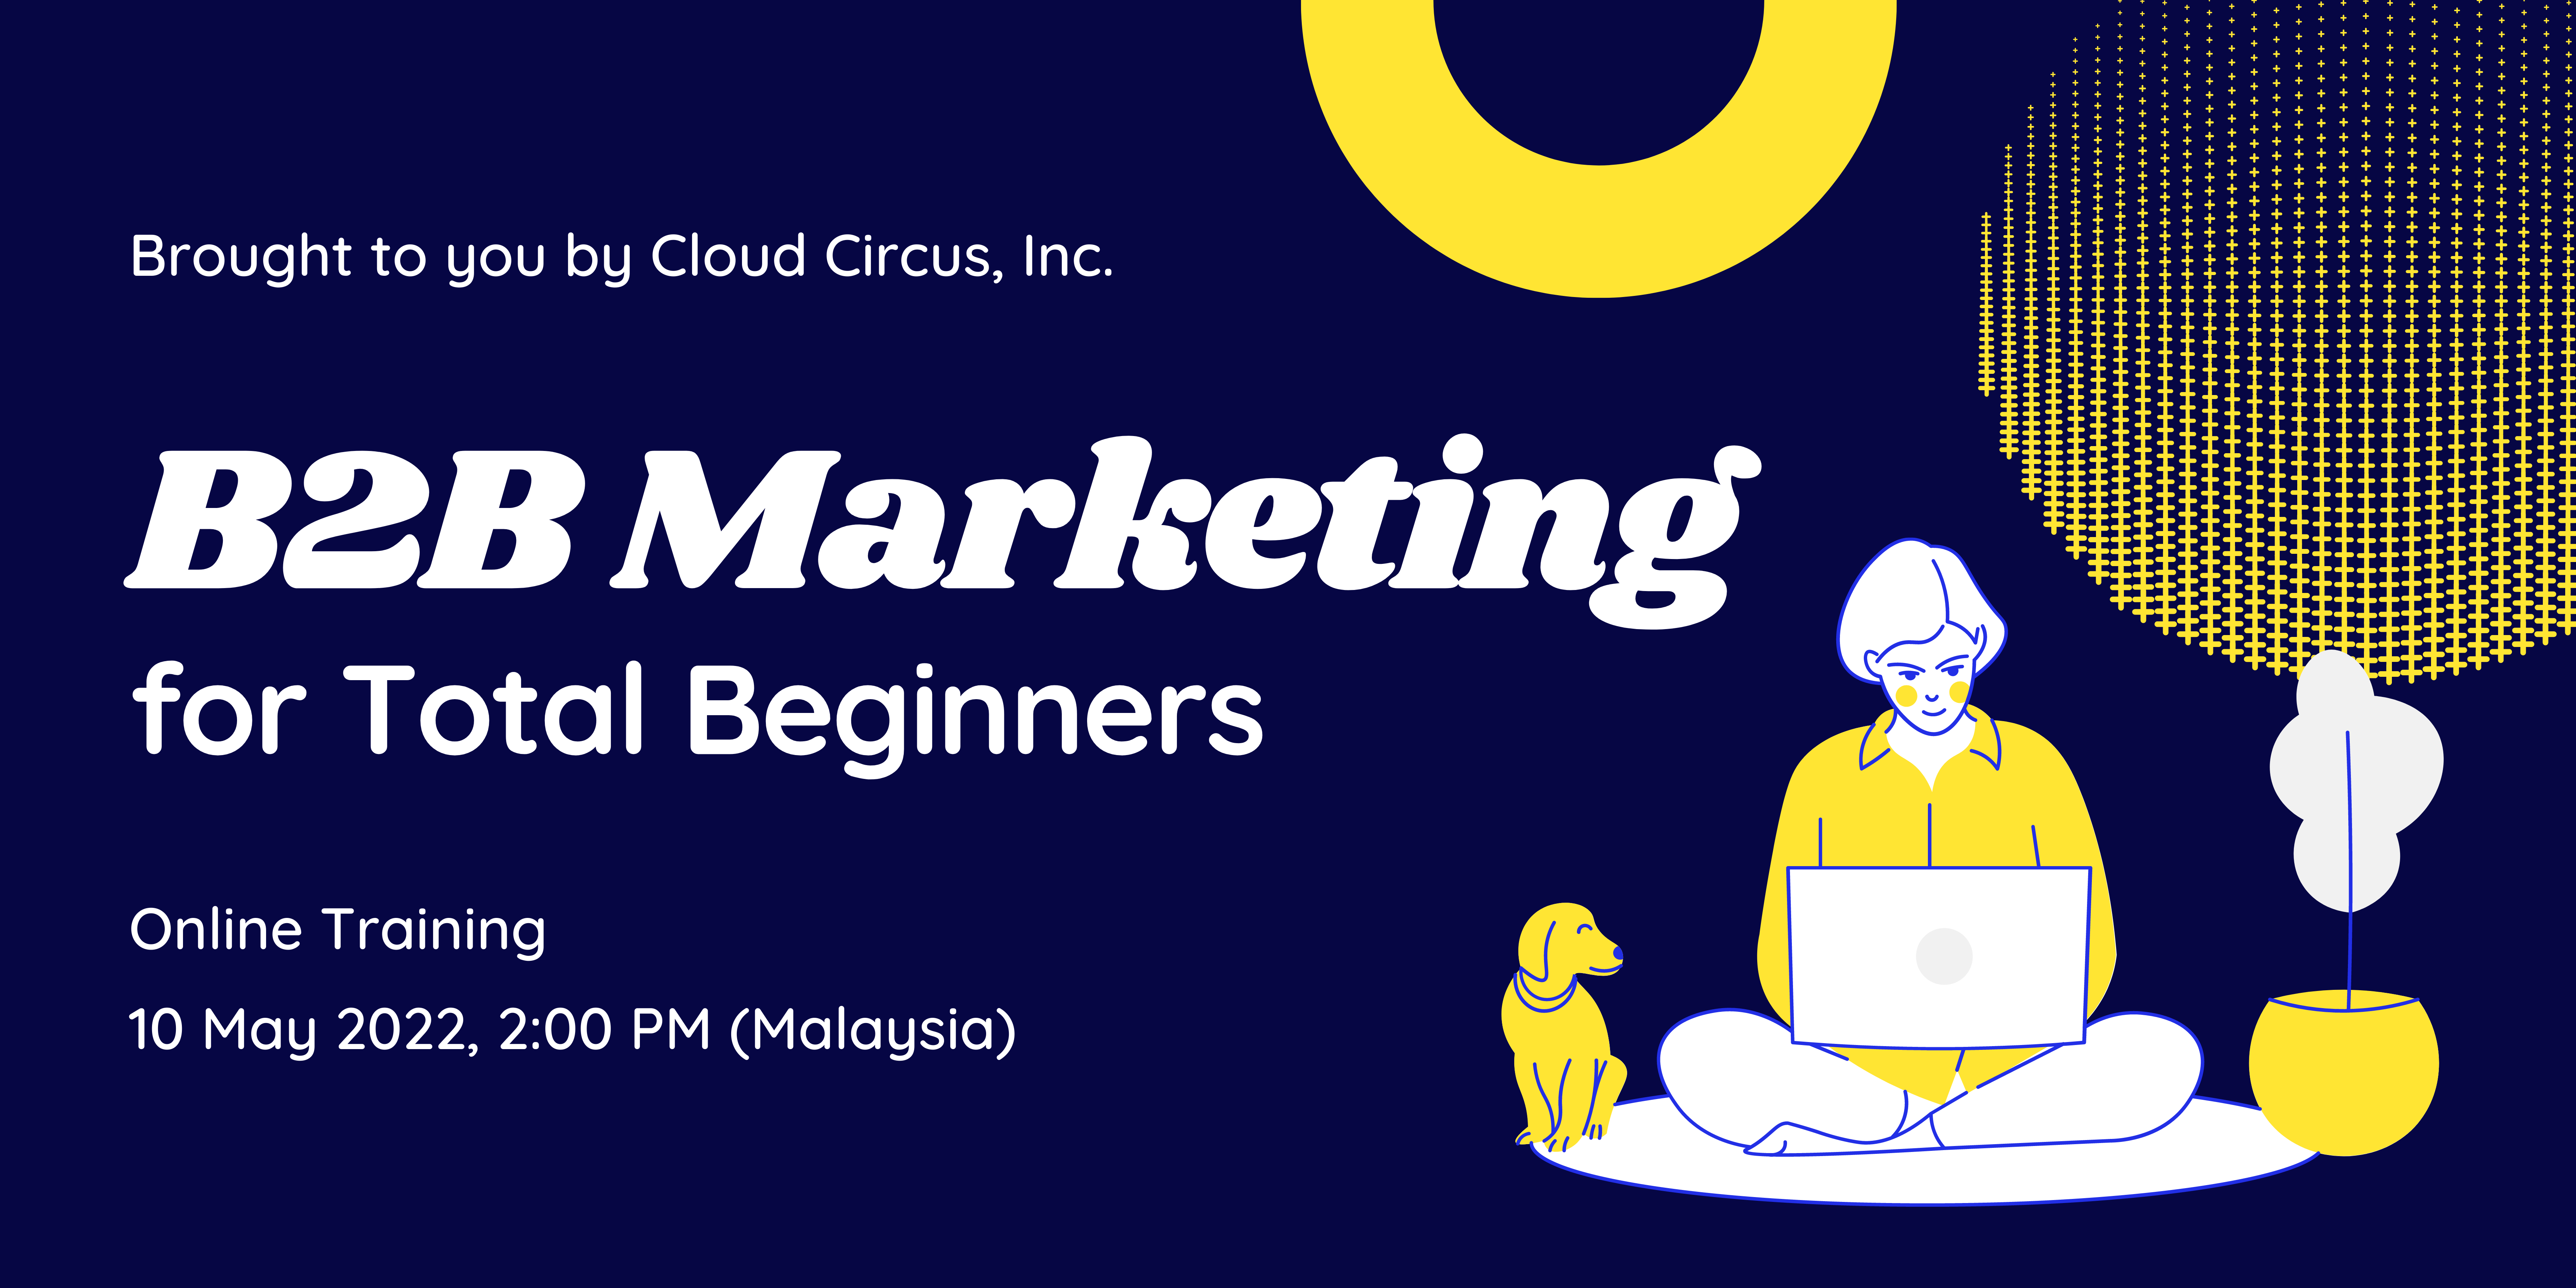 B2B Marketing for Total Beginners (10 May 2022)